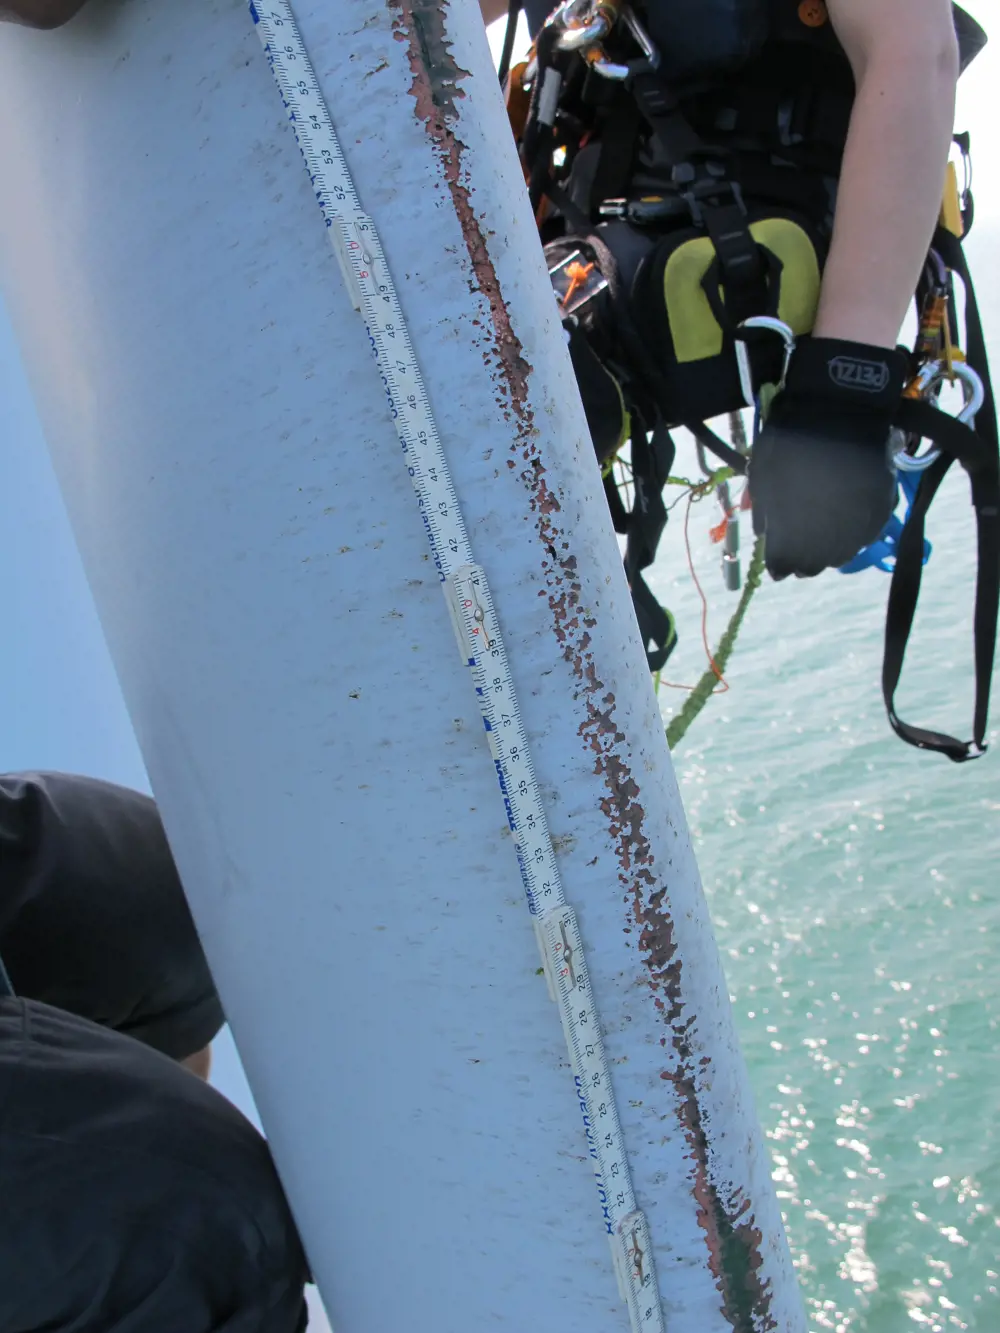 A close-up of the damage on a wind turbine blade out at sea.